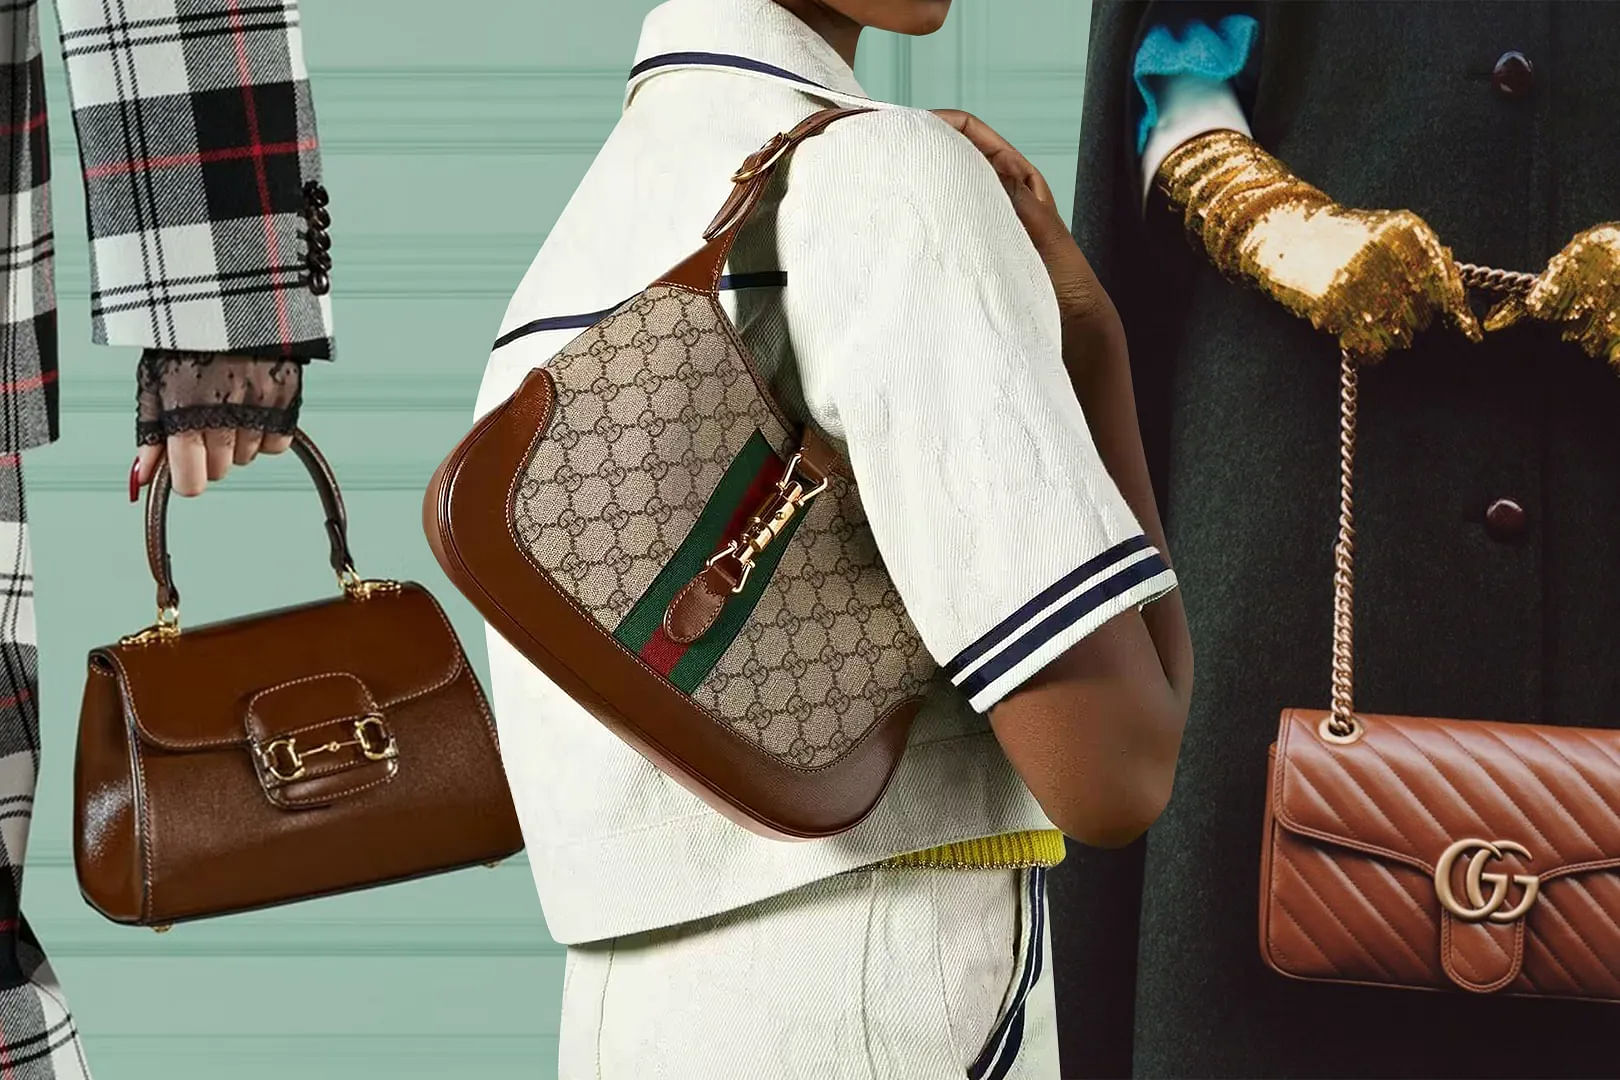 30 of the Best Designer Purse Brands Every Fashionista Should Know About